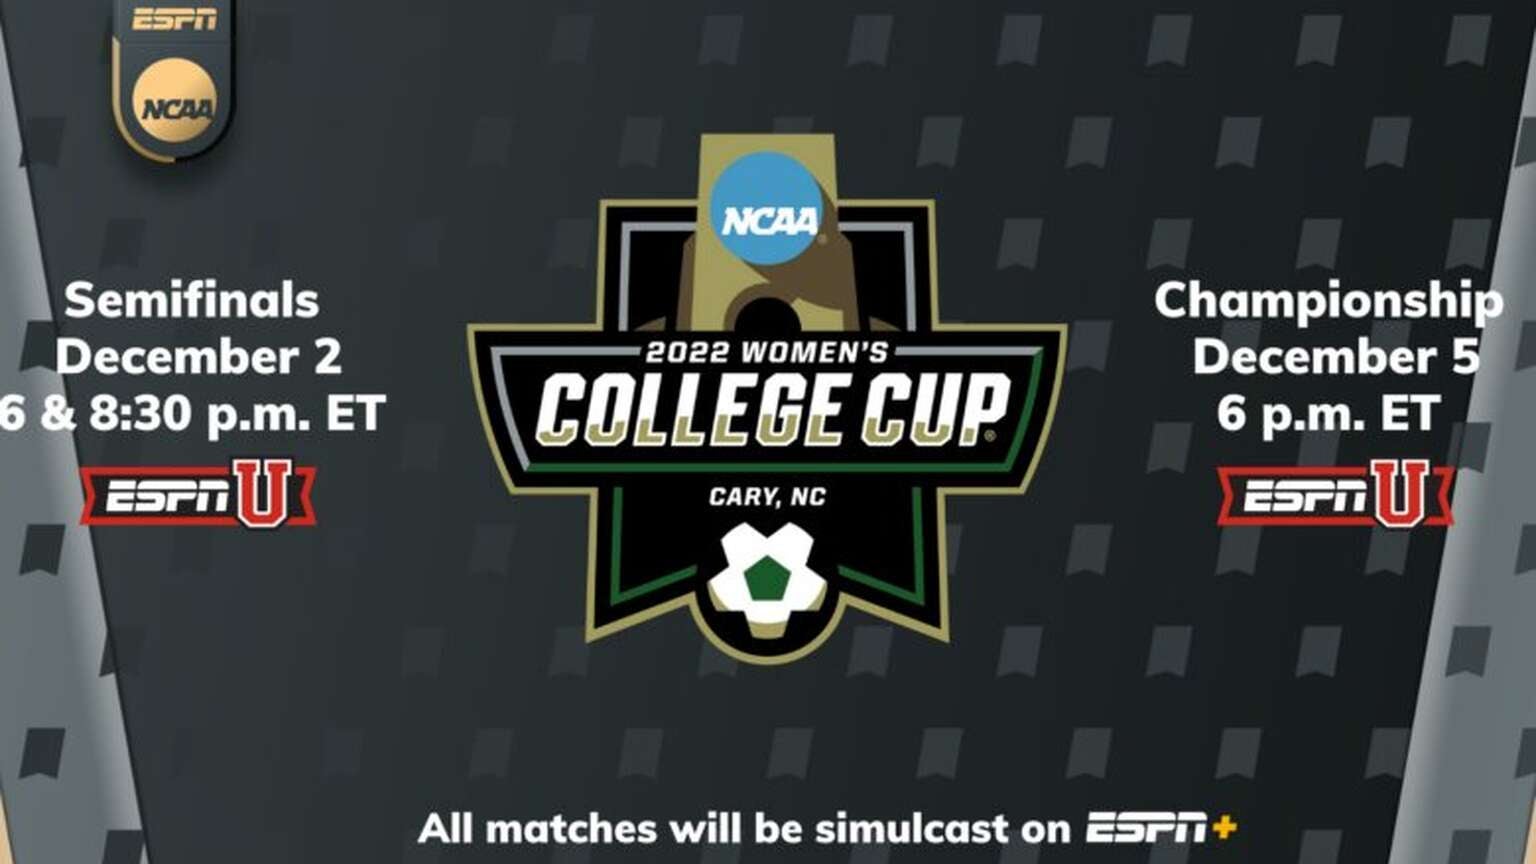 How to Watch 2022 NCAA Women's College Cup Soccer Championship Live For